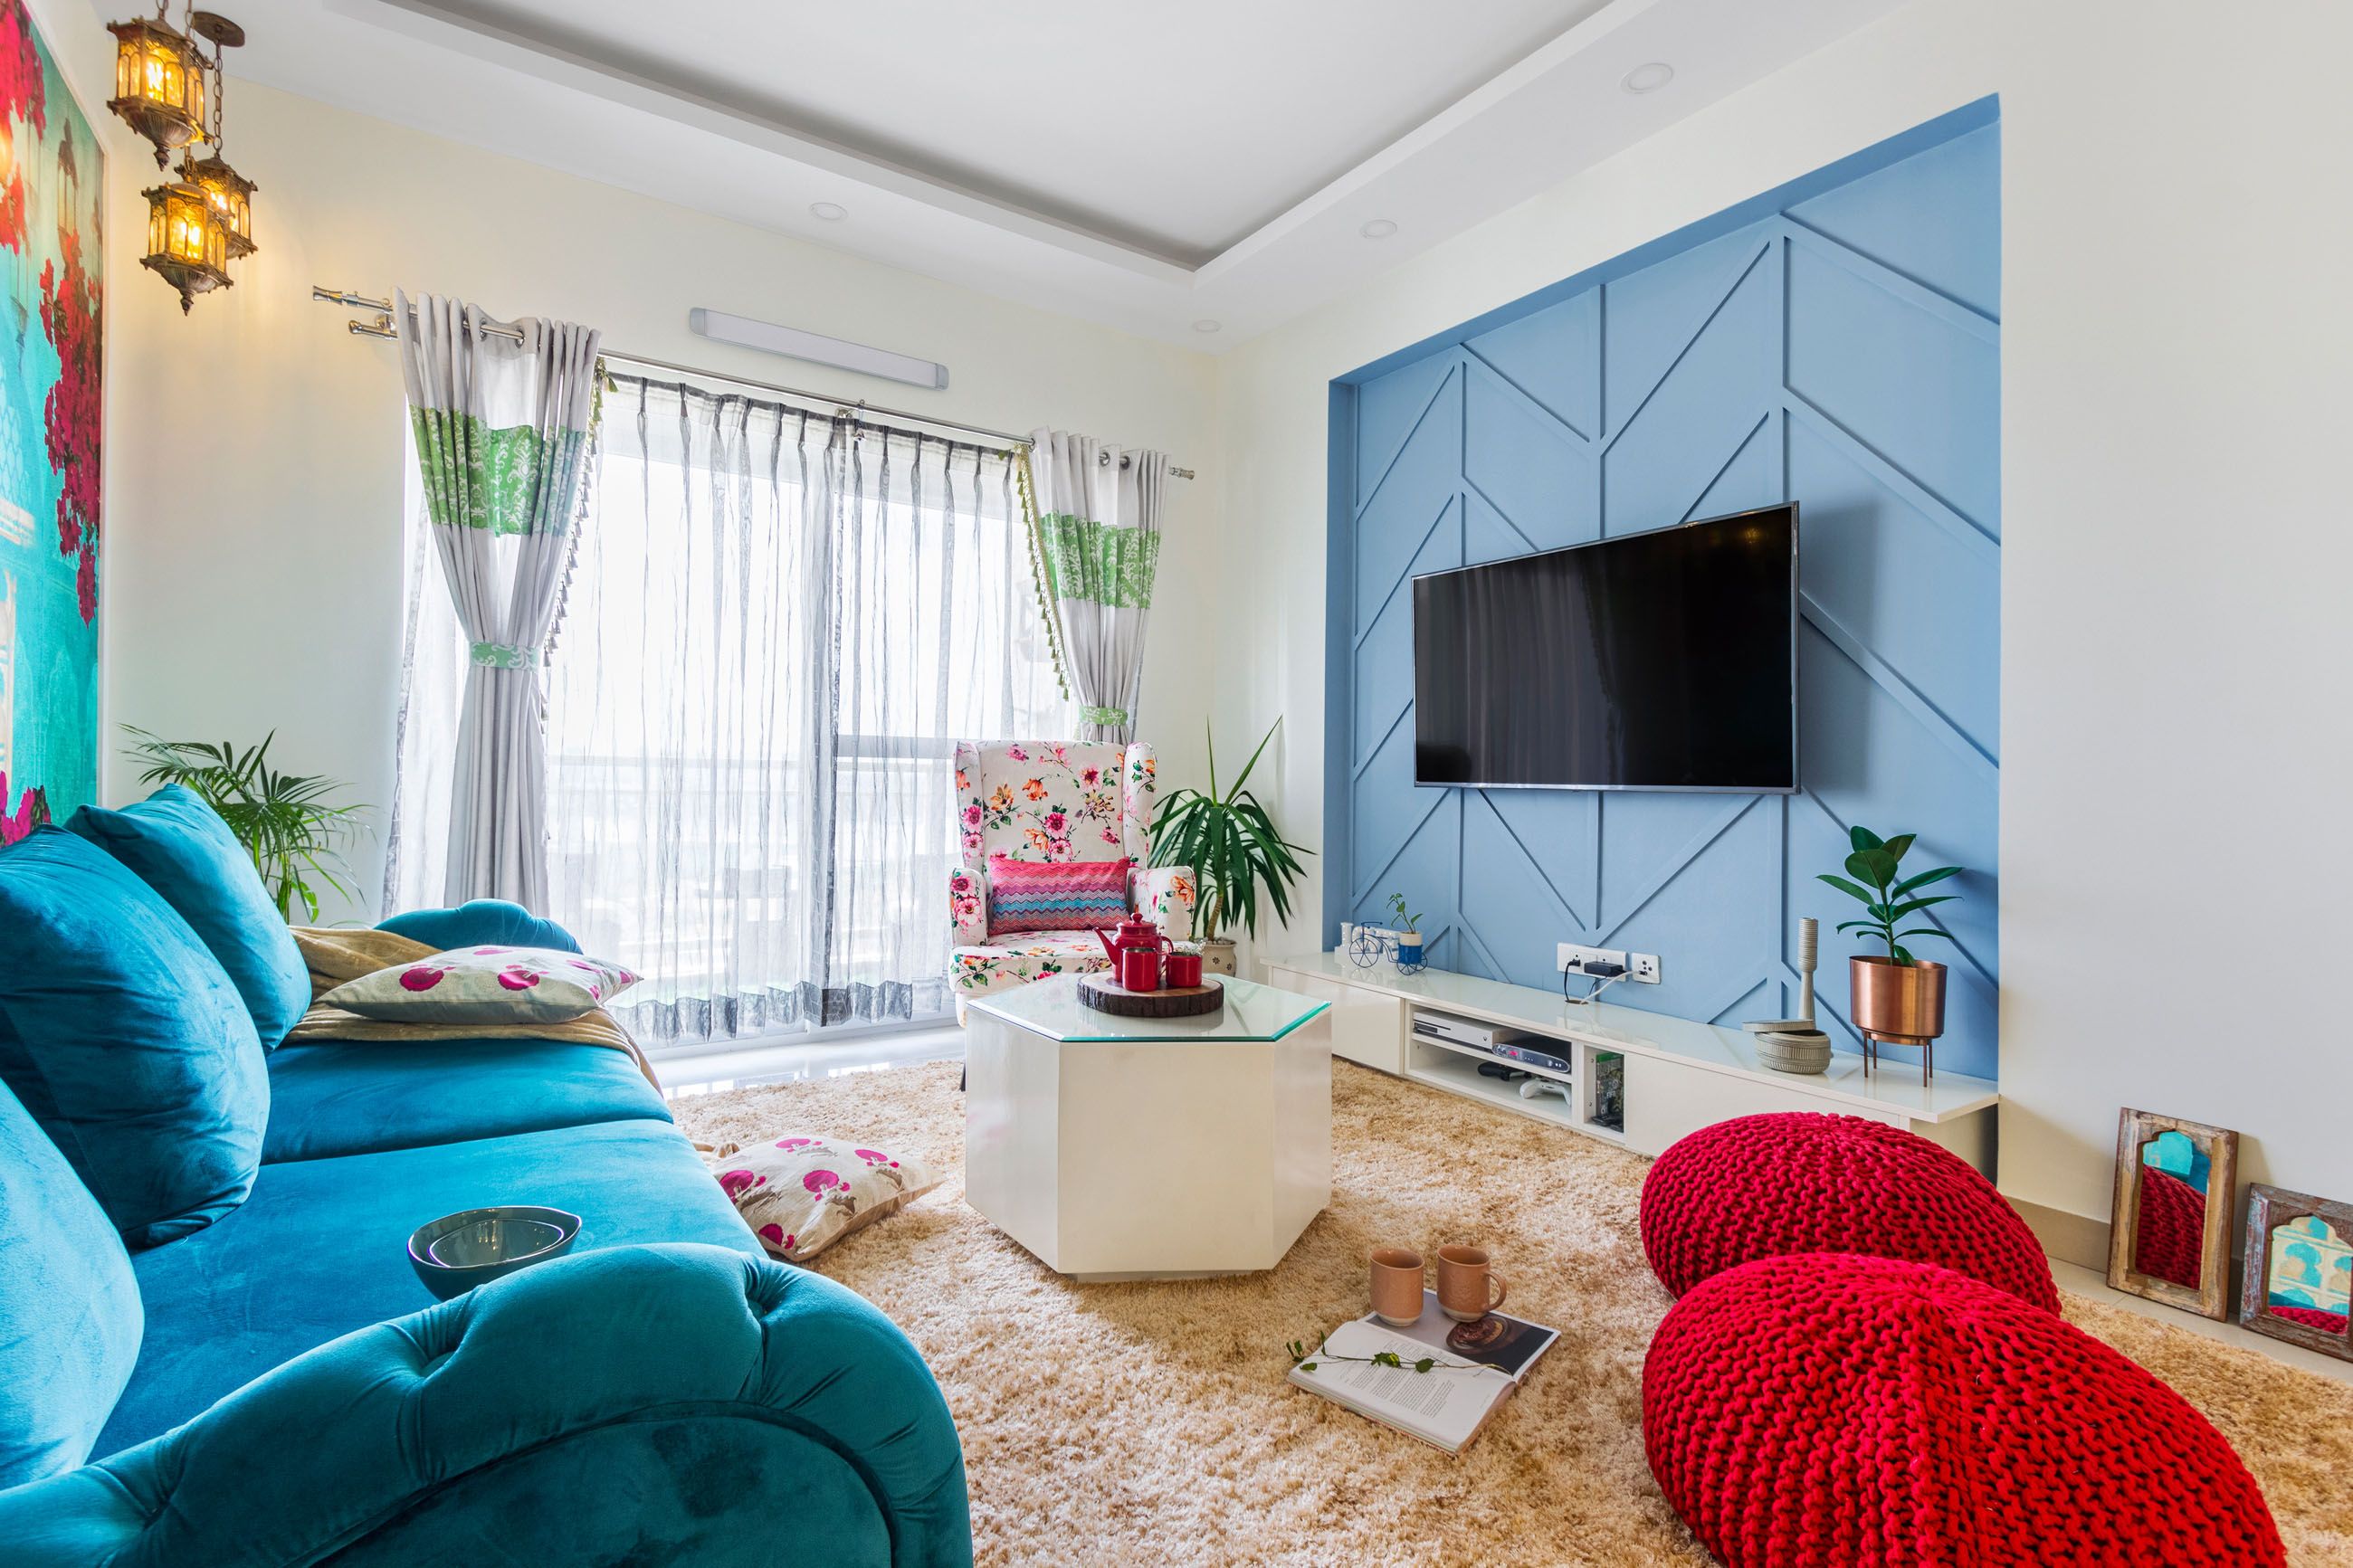 Contemporary 2-BHK Flat Design In Bangalore With Blue And Pink Living Room Design And Bougainvillea Wallpaper